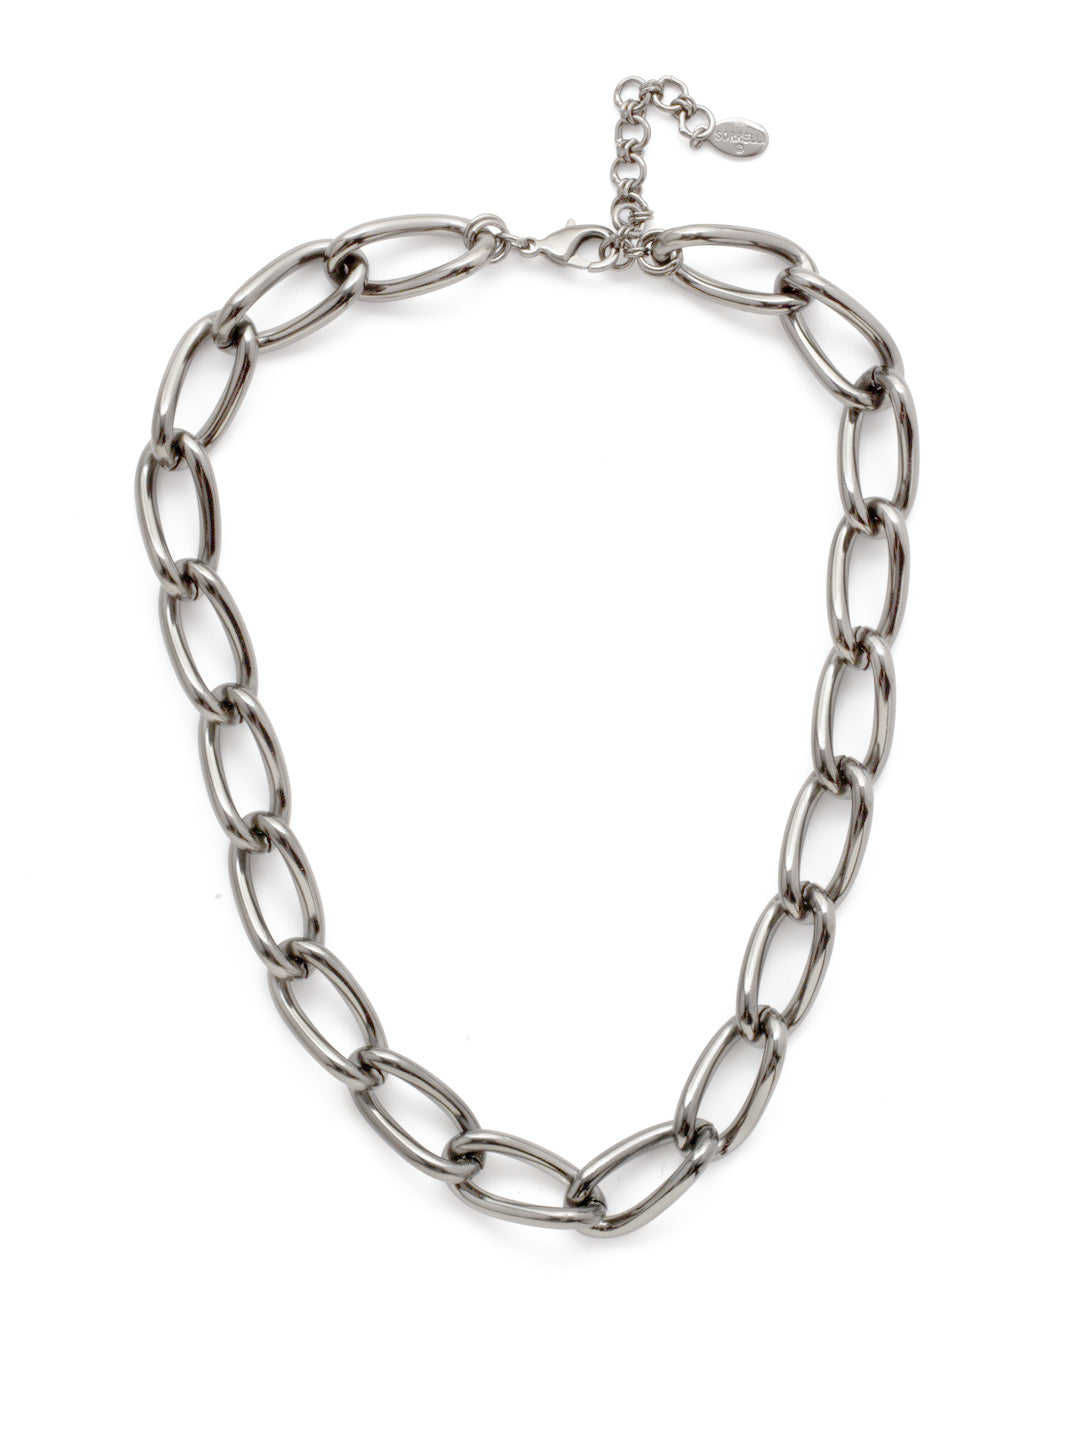 Lyric Tennis Necklace - 4NEP8ASCRY - <p>Looking for a simple but bold statement piece? Find it in the Lyric Tennis Necklace. If you're a fan of chain metal work, this is a must-have. From Sorrelli's Crystal collection in our Antique Silver-tone finish.</p>